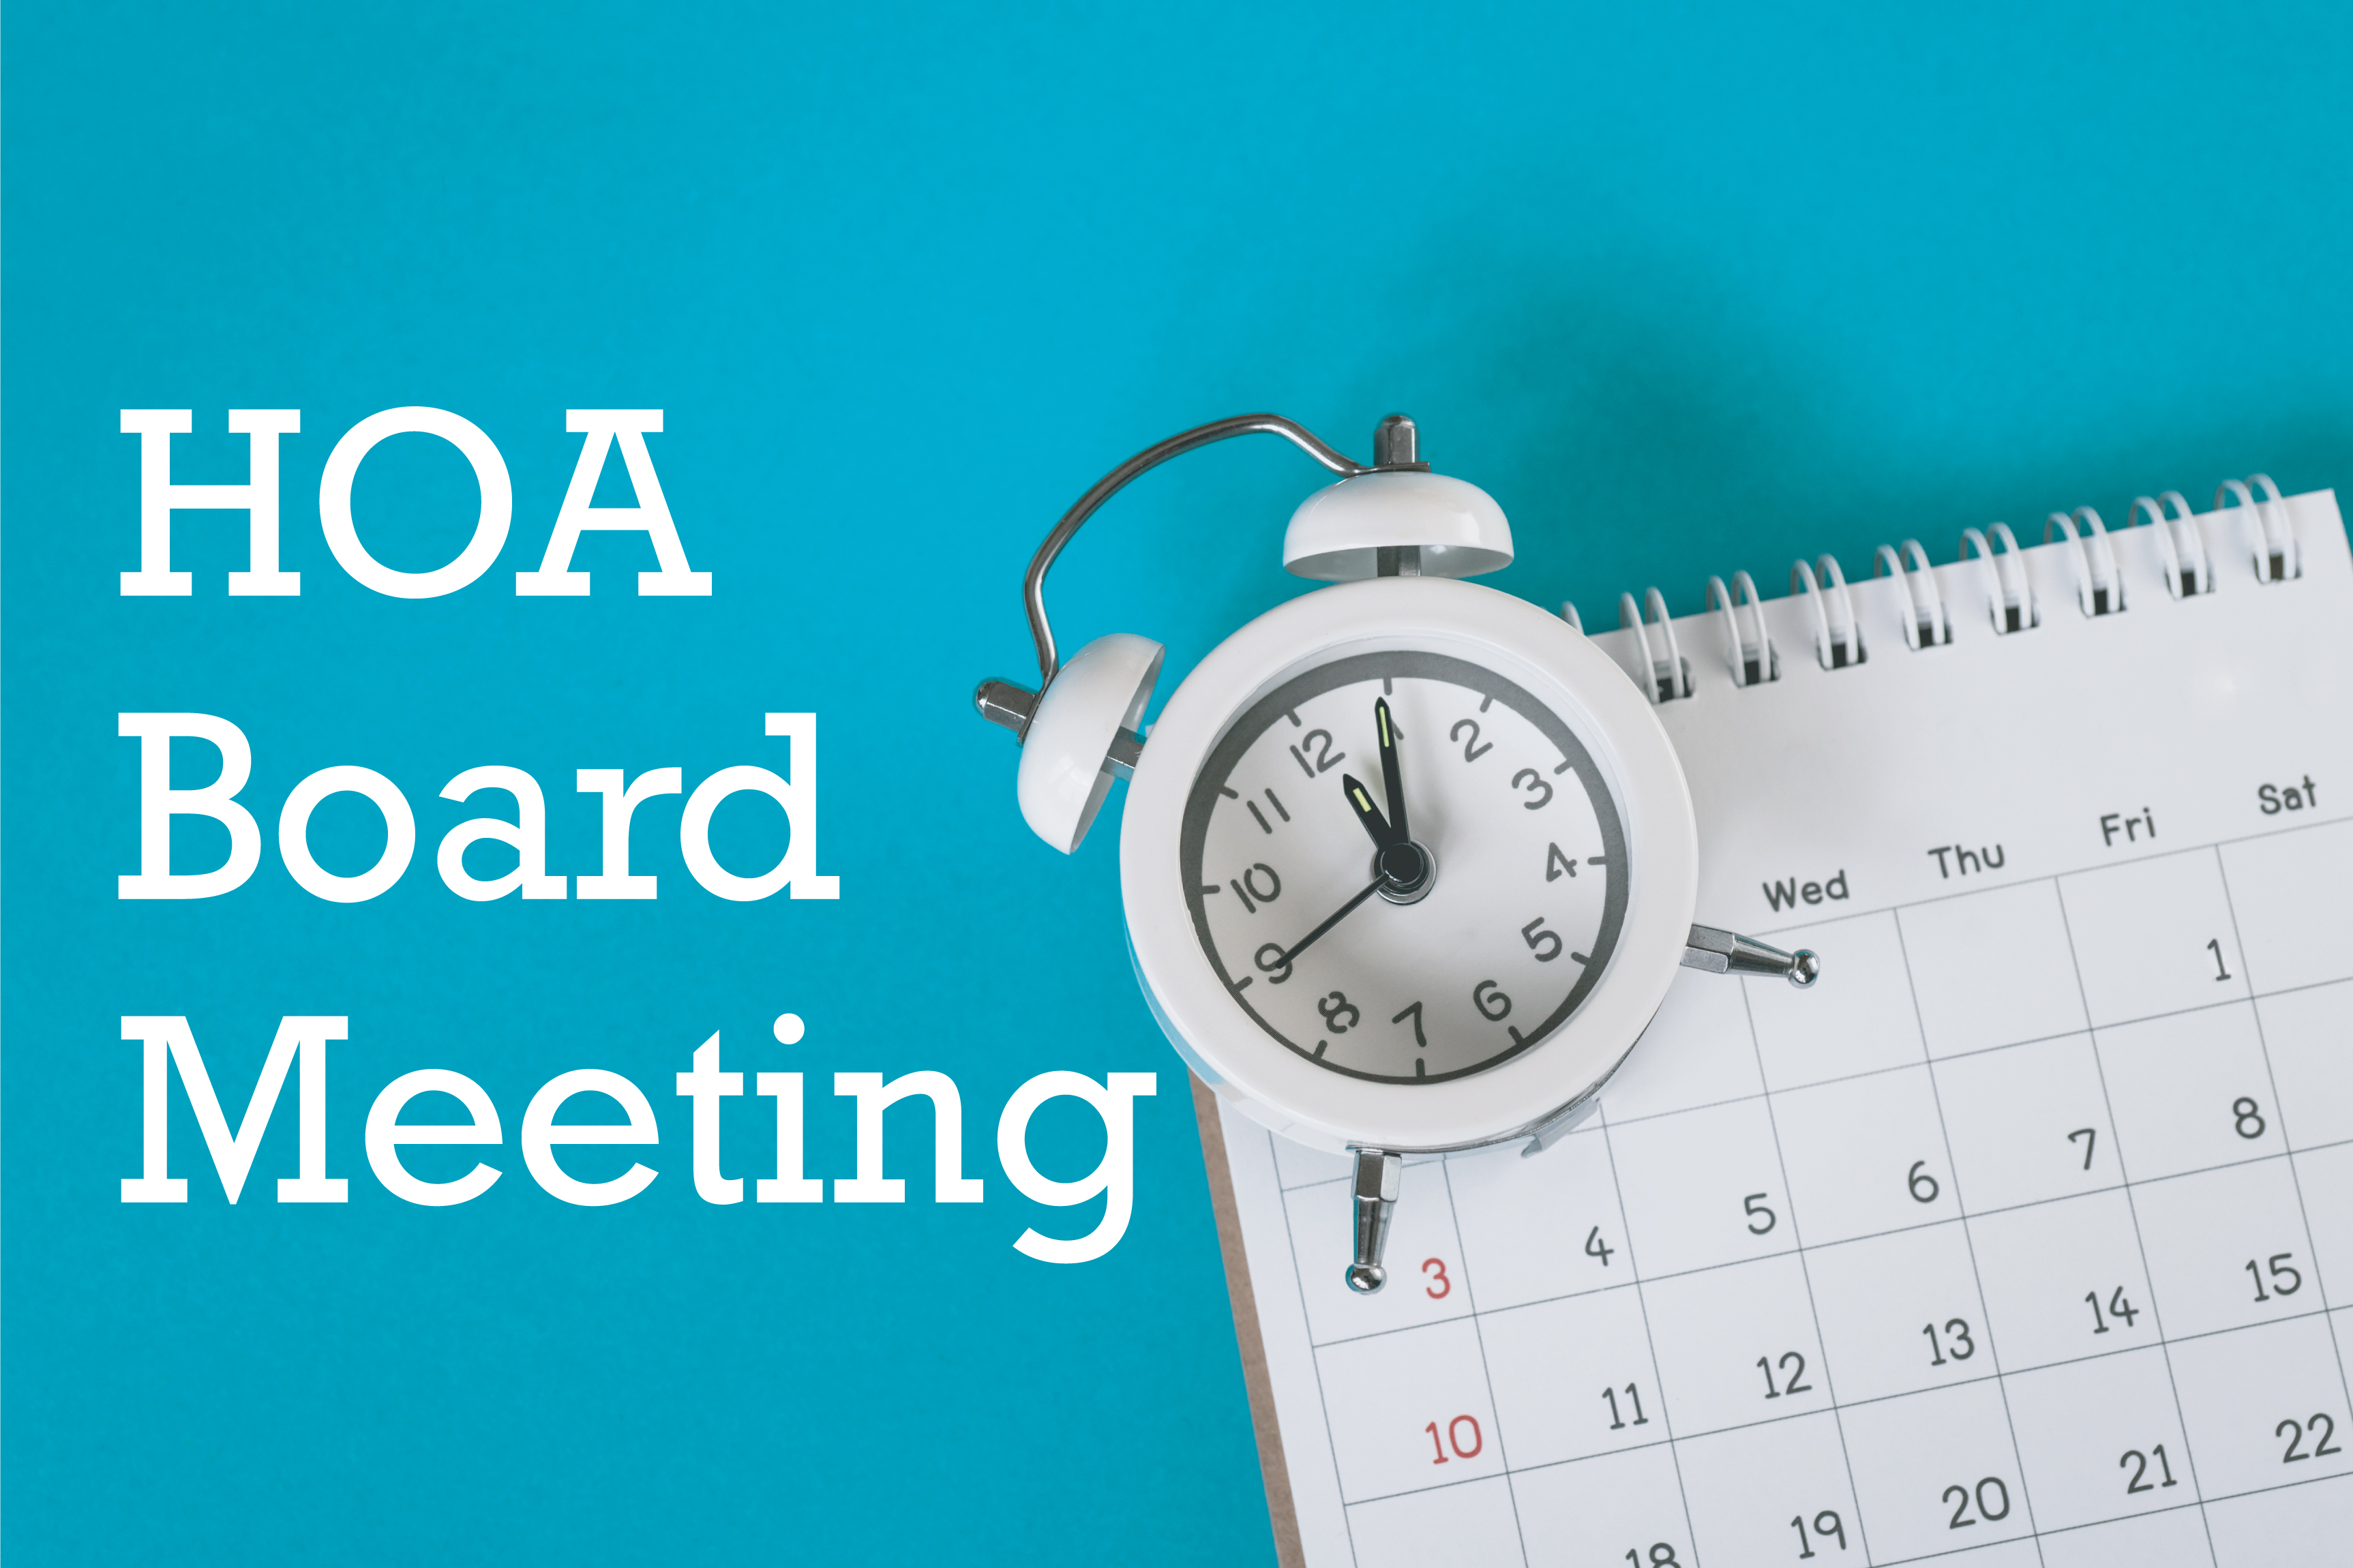 West Memorial HOA Board Meeting Set for March 26